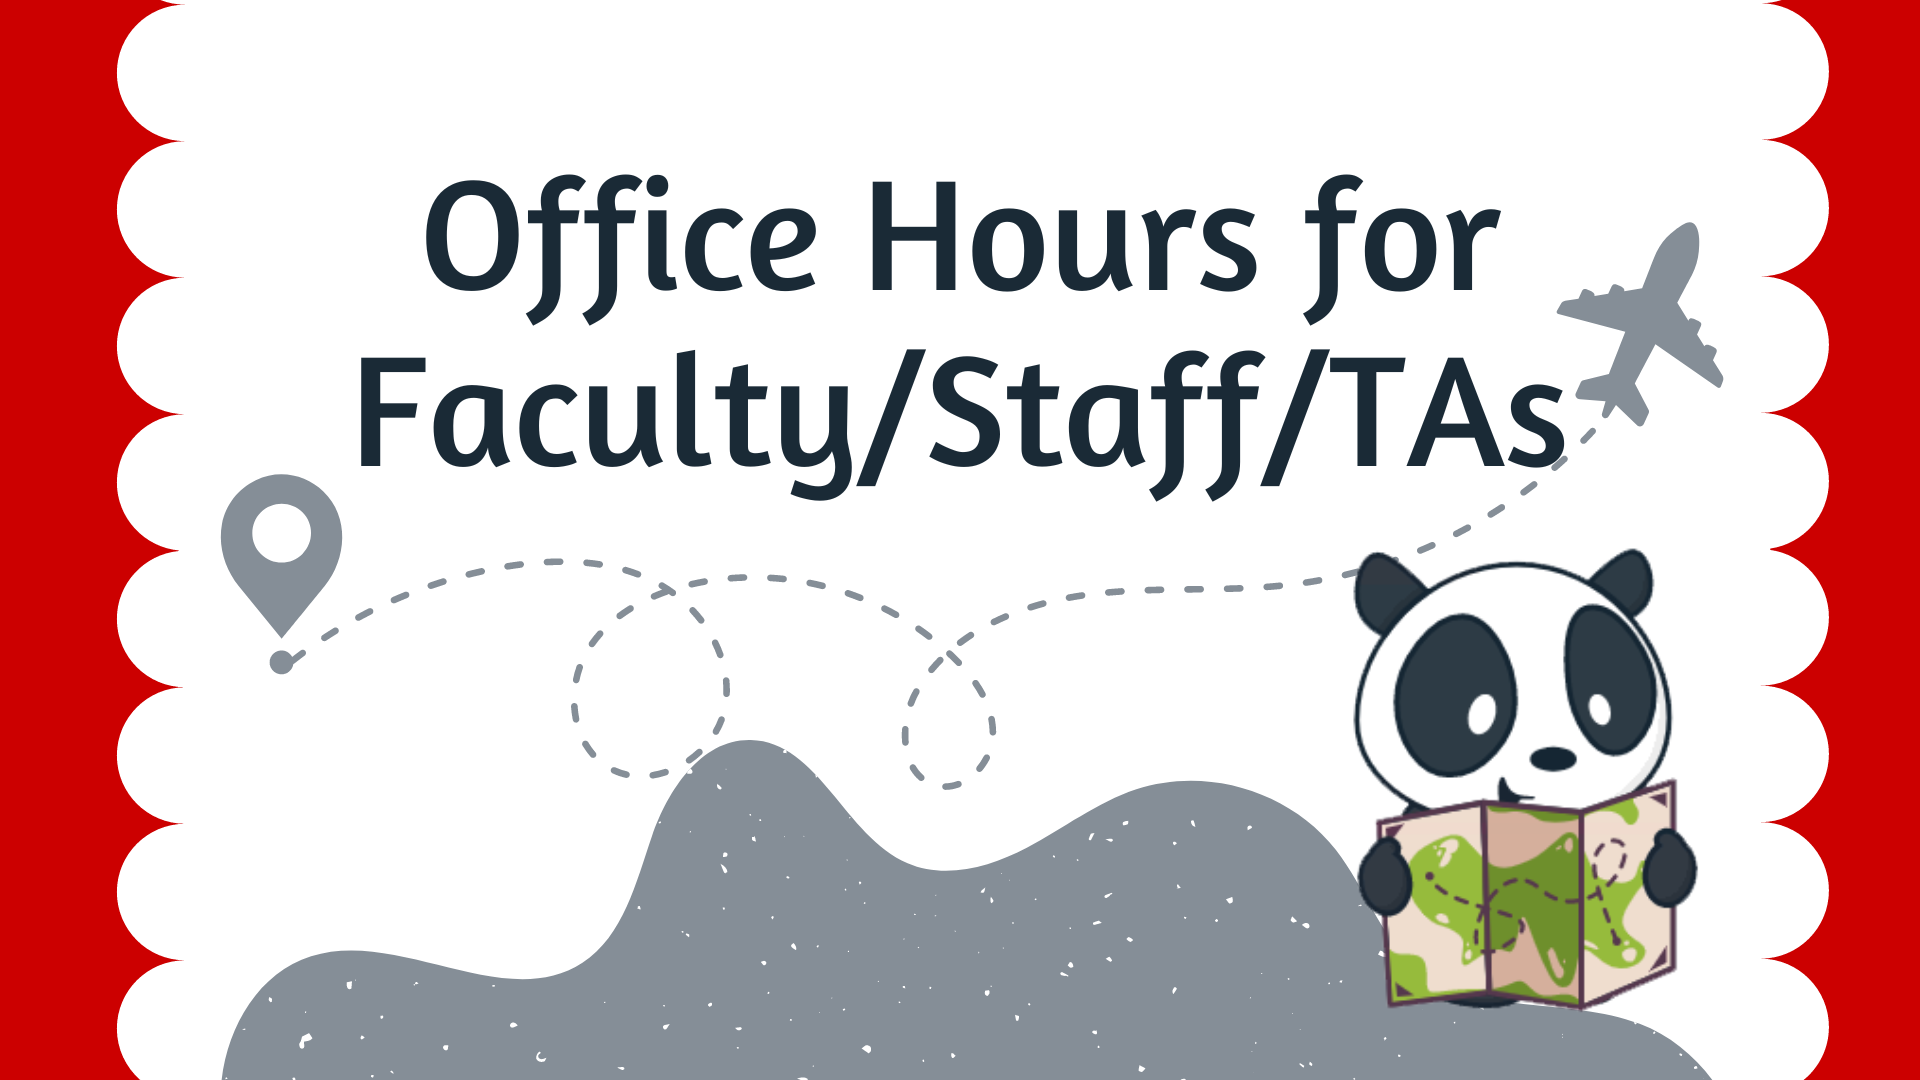 Office Hours for Faculty/Staff/TAs